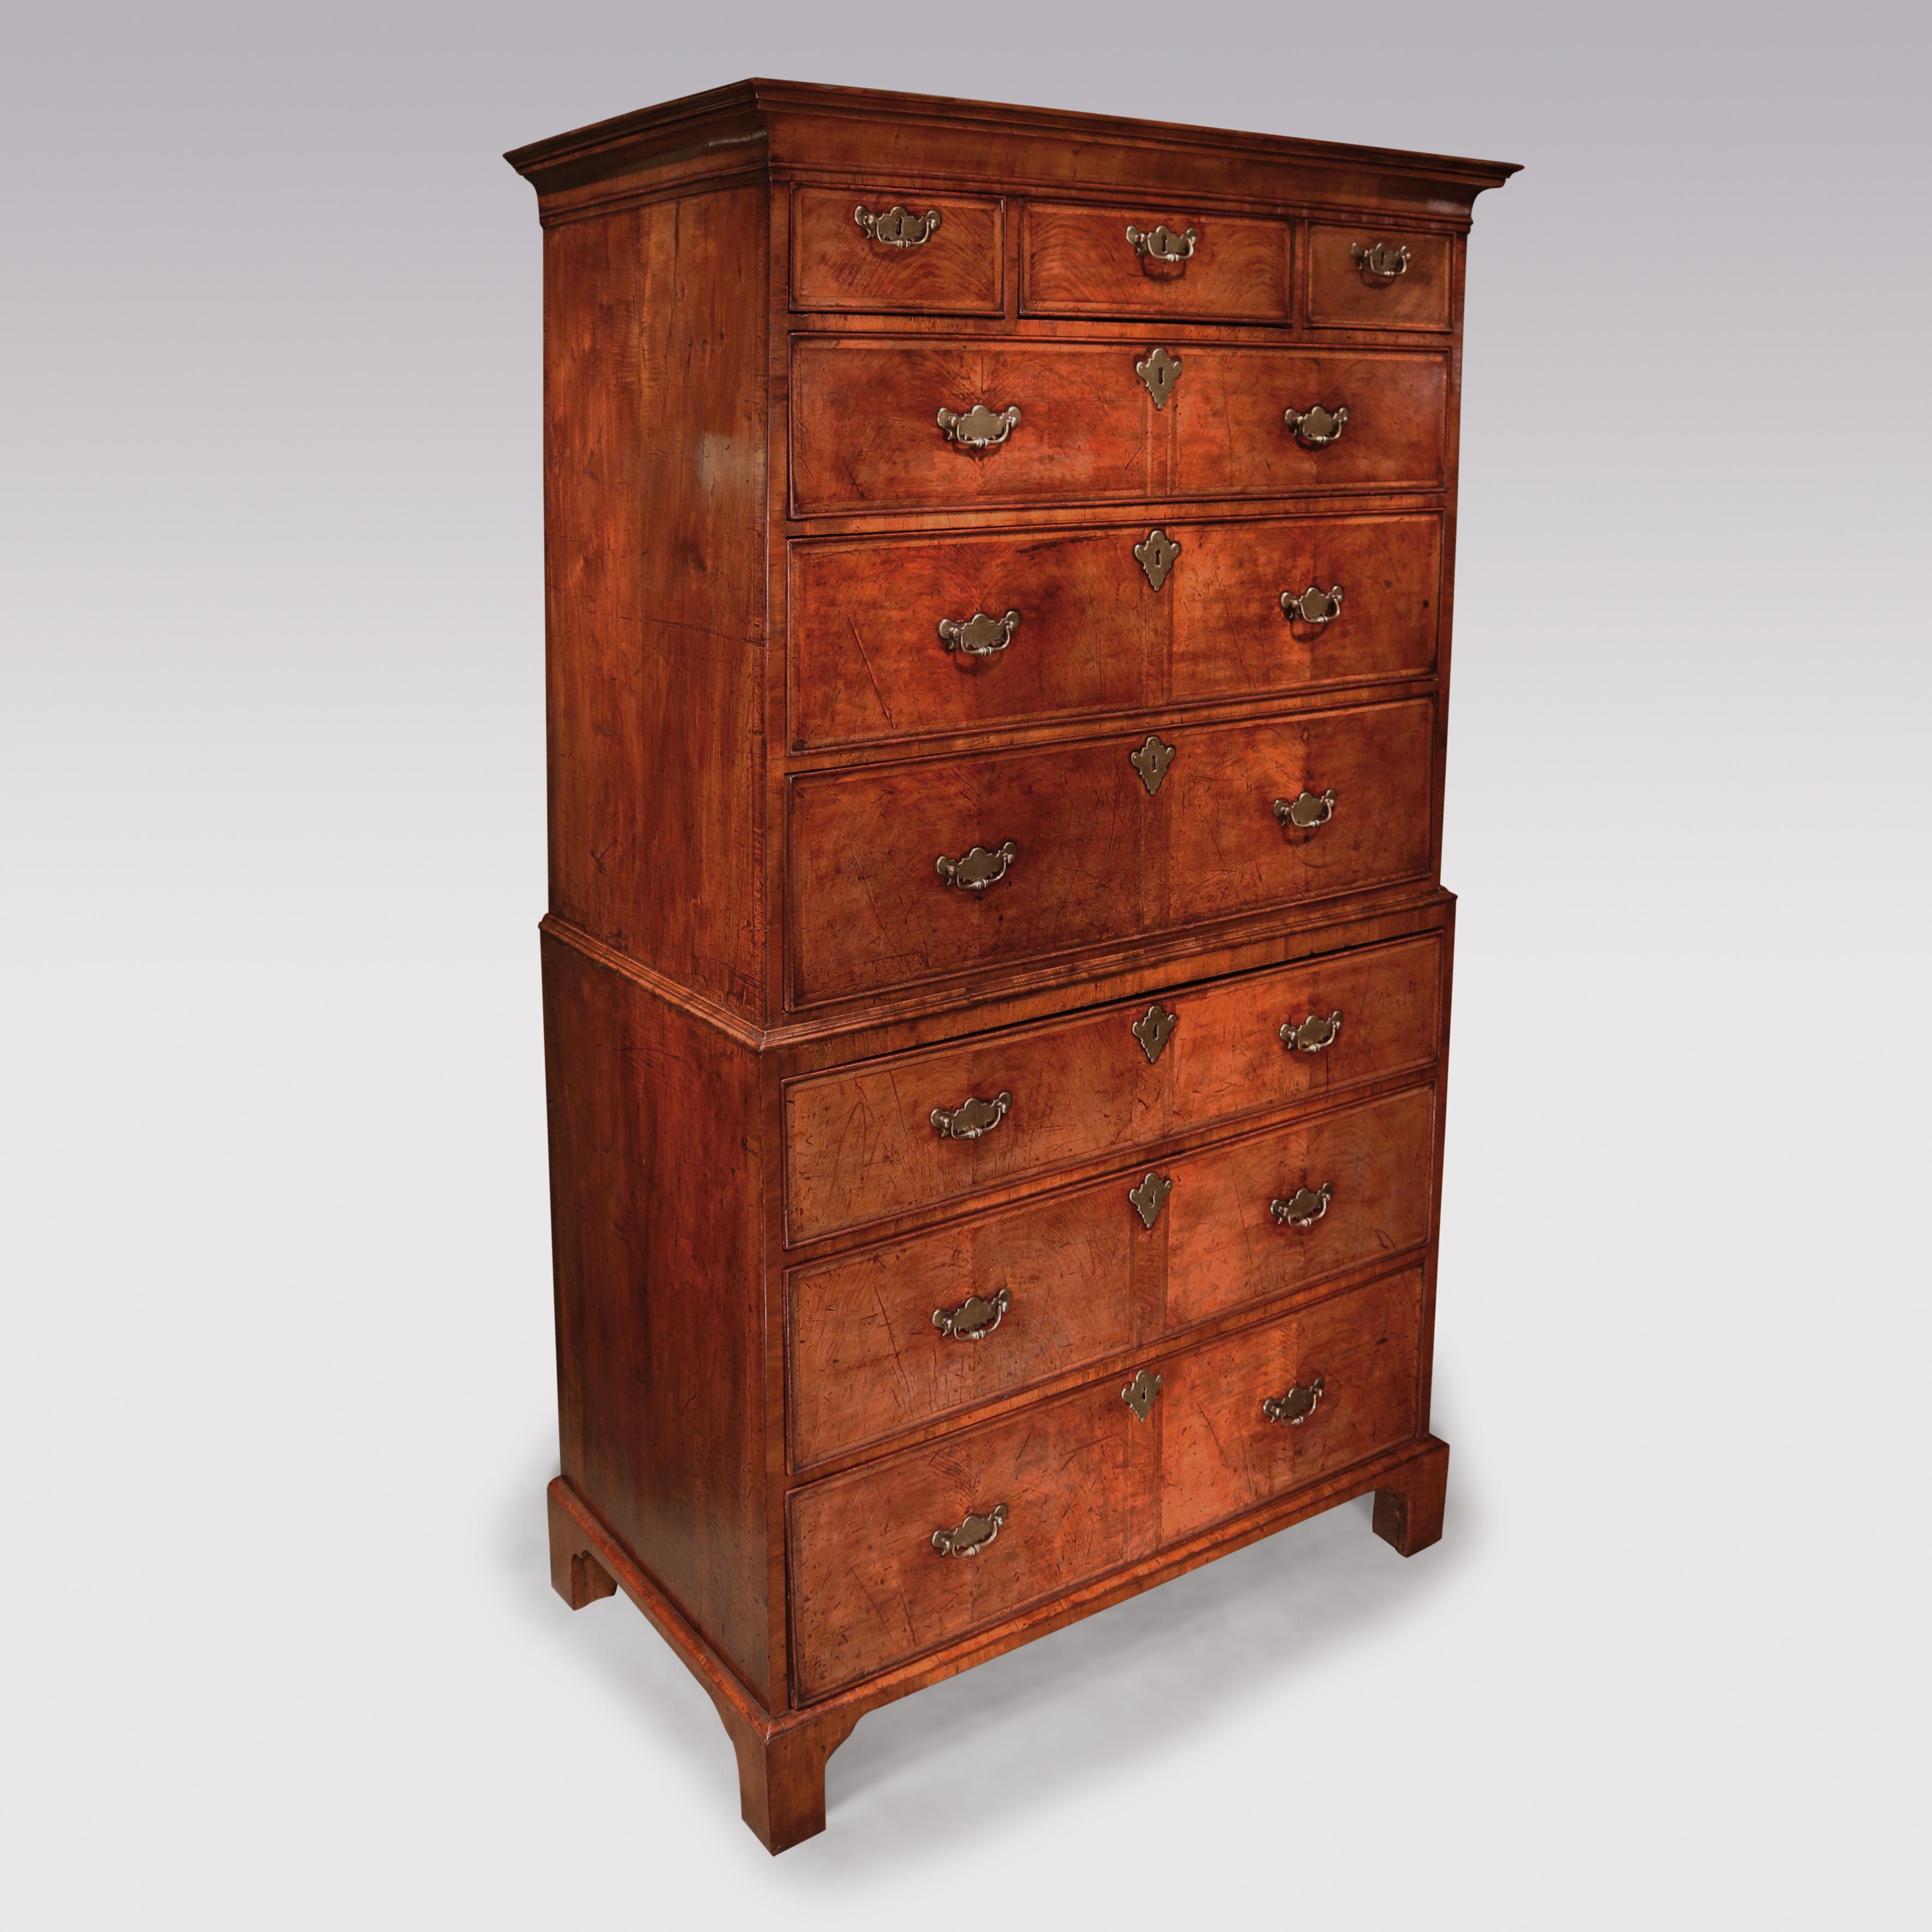 A George II period golden coloured walnut tallboy having moulded cornice above herring bone inlaid cockbeaded drawers retaining original handles. The long drawers veneered to resemble 2 short drawers. The piece, having end-grained mouldings and